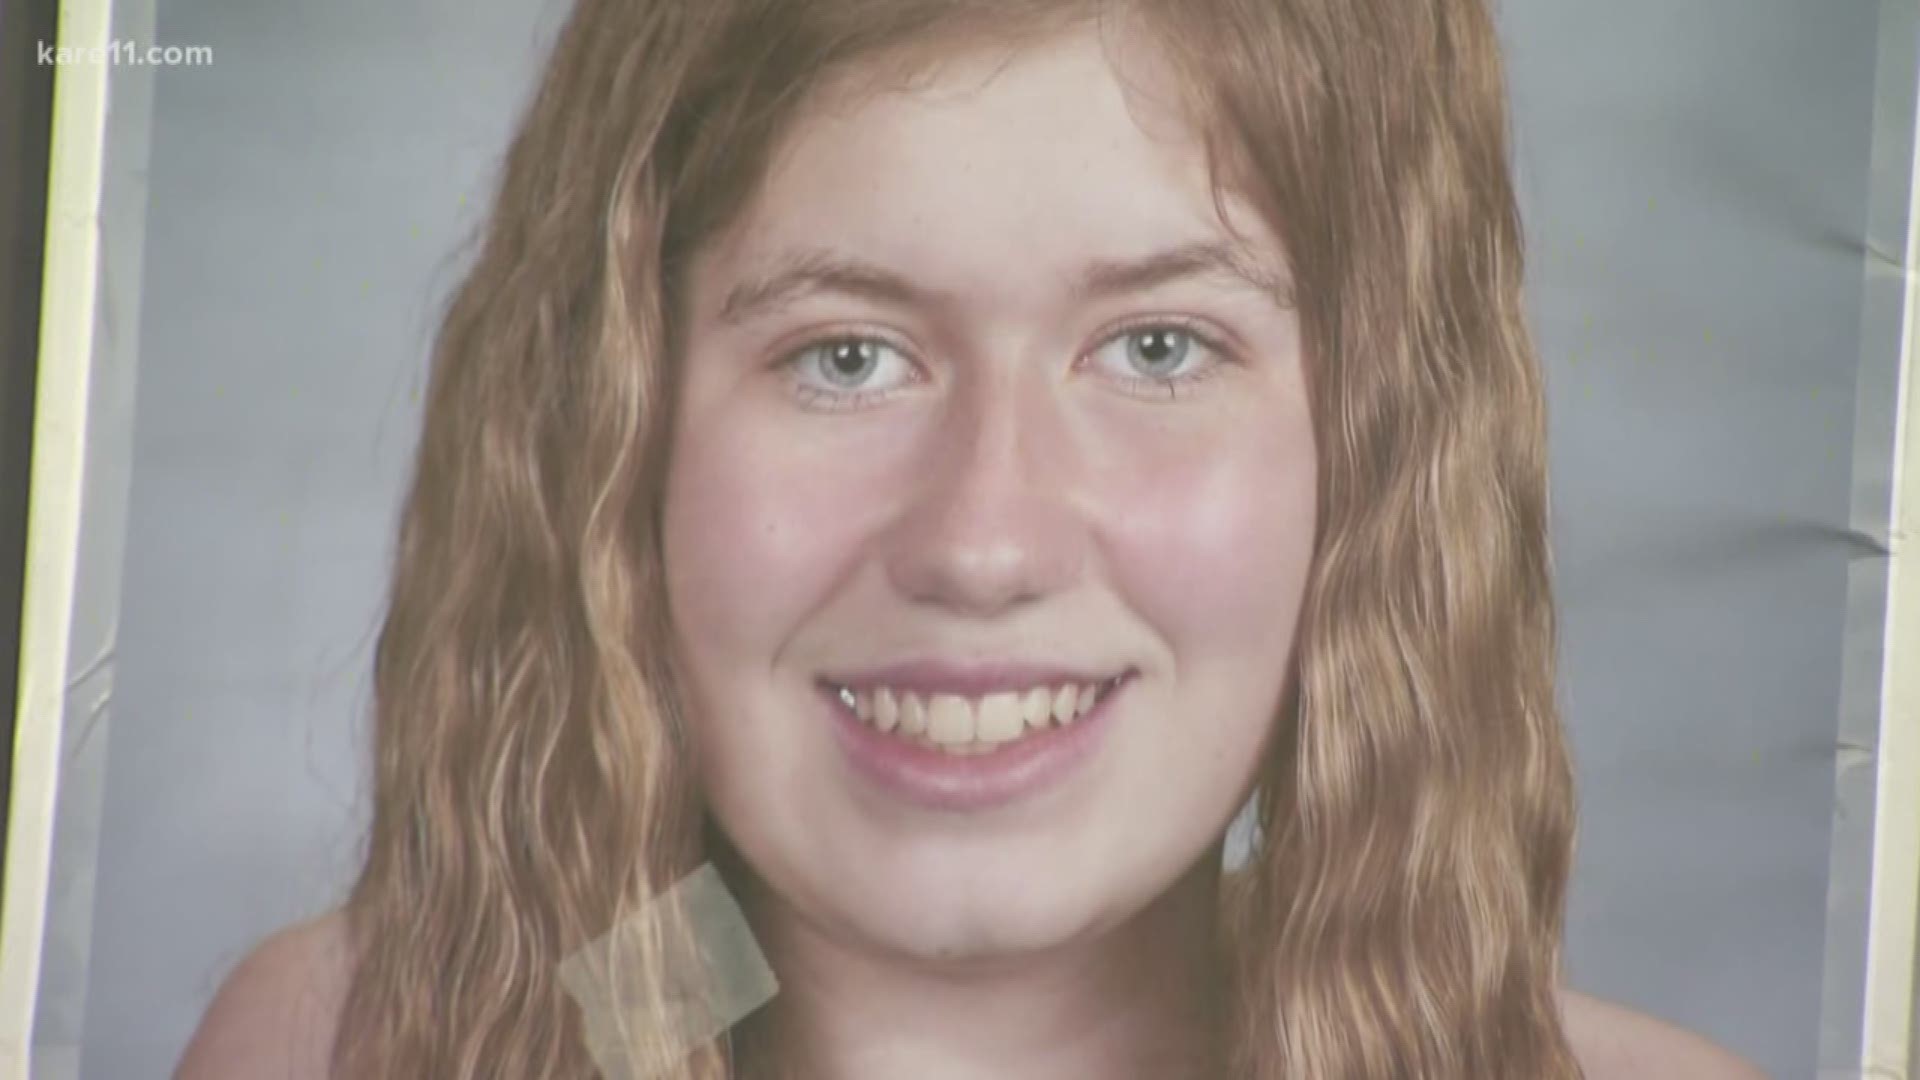 Authorities to examine more video as search for Jayme 